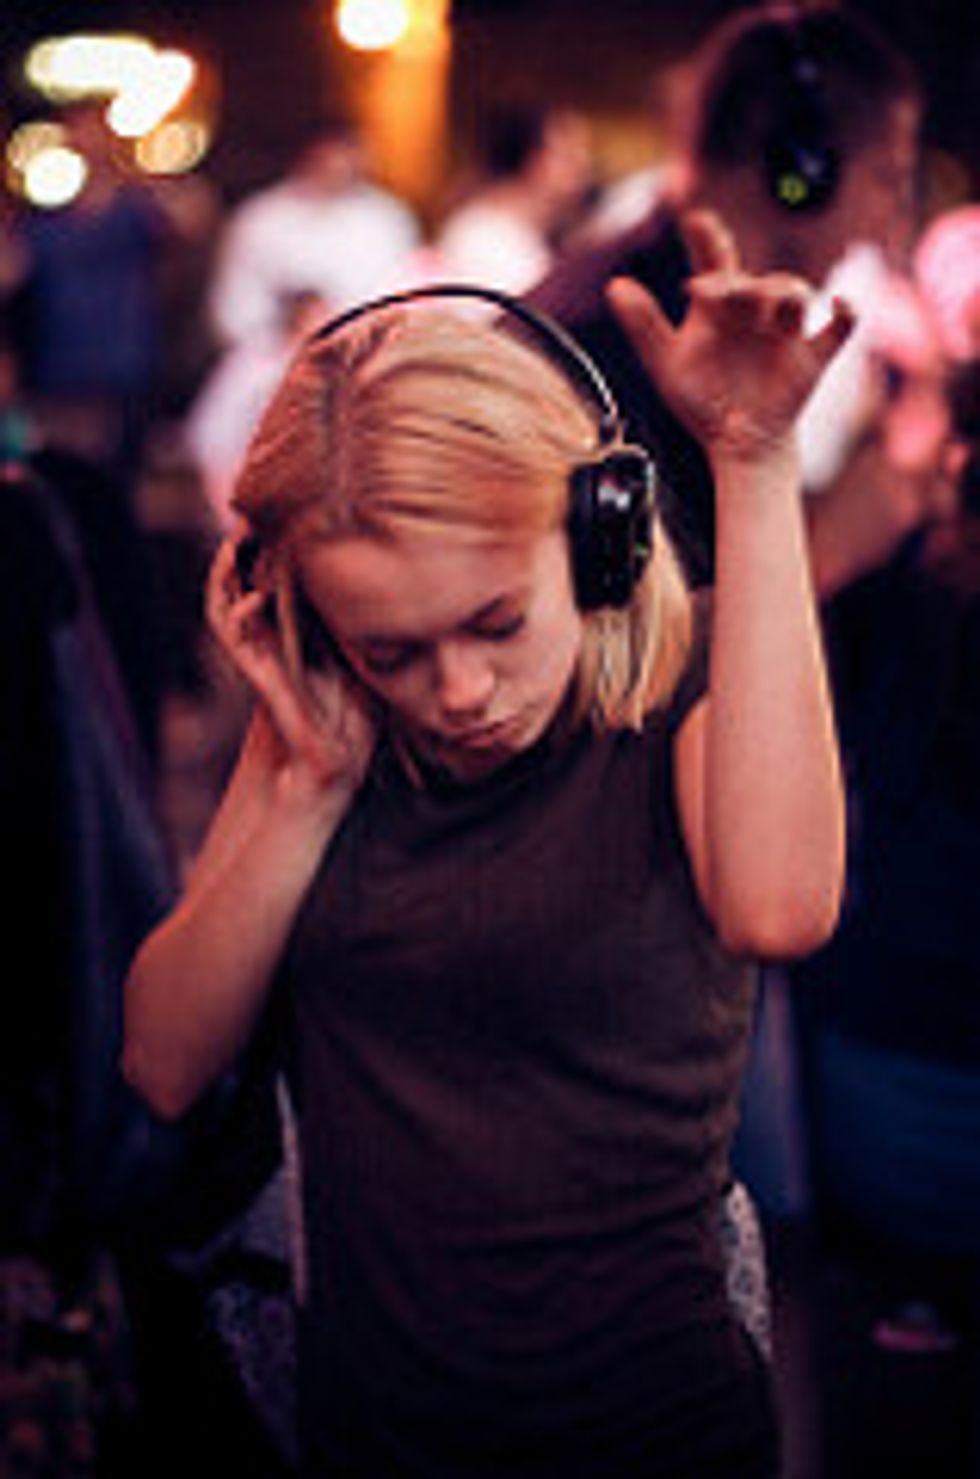 Silent Discos: An Illusion of Independence